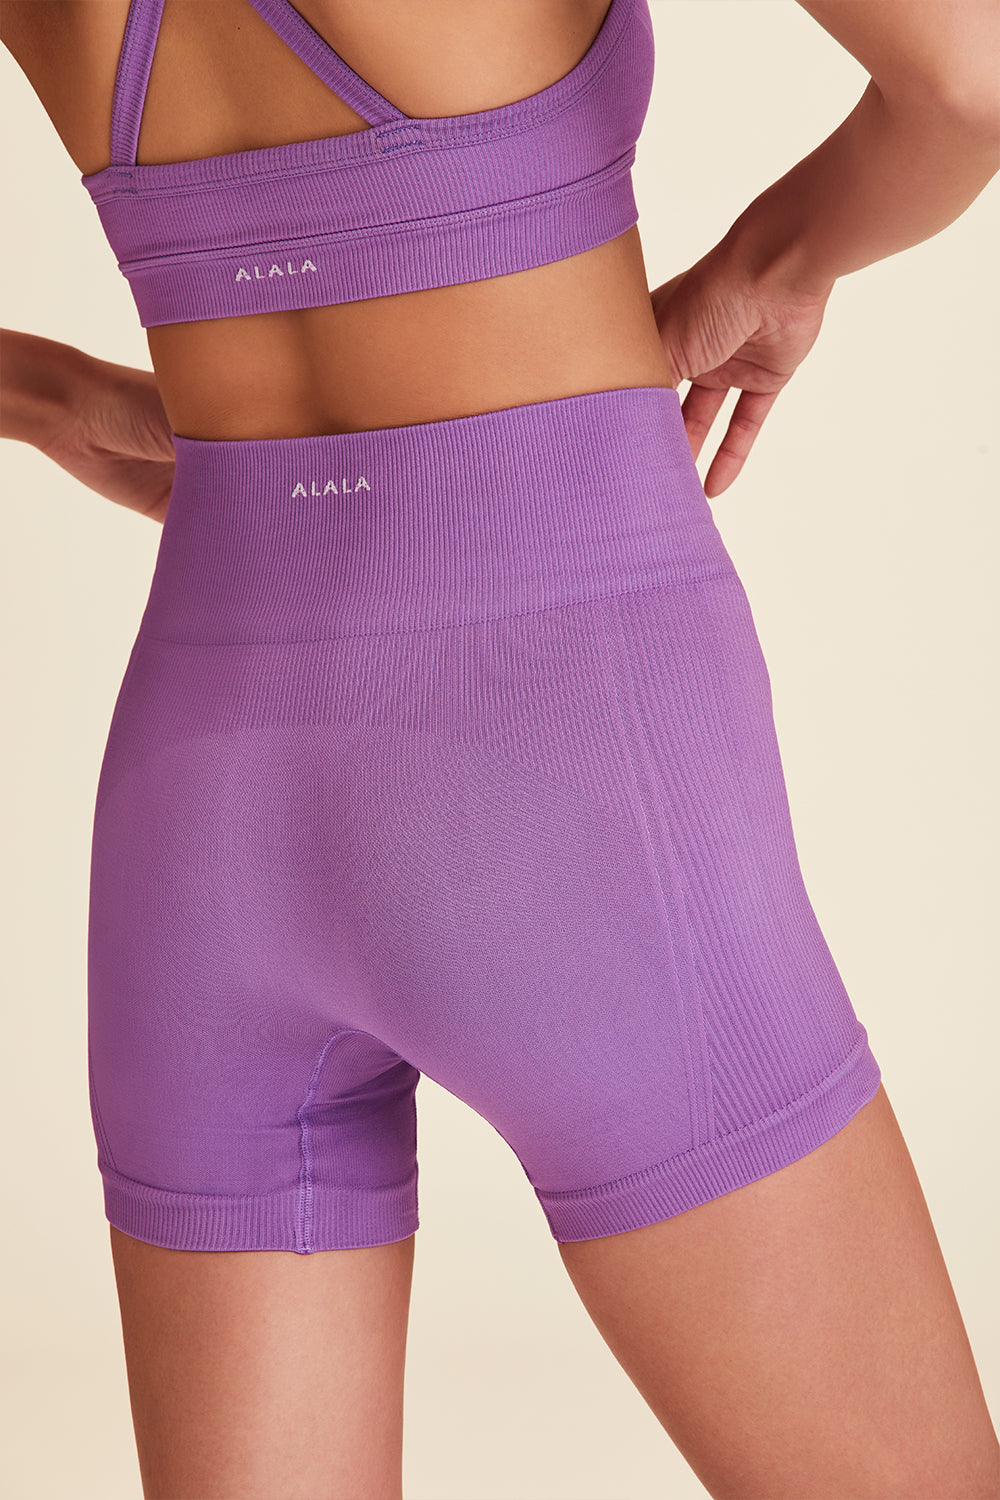 Amethyst seamless short for women from Alala activewear